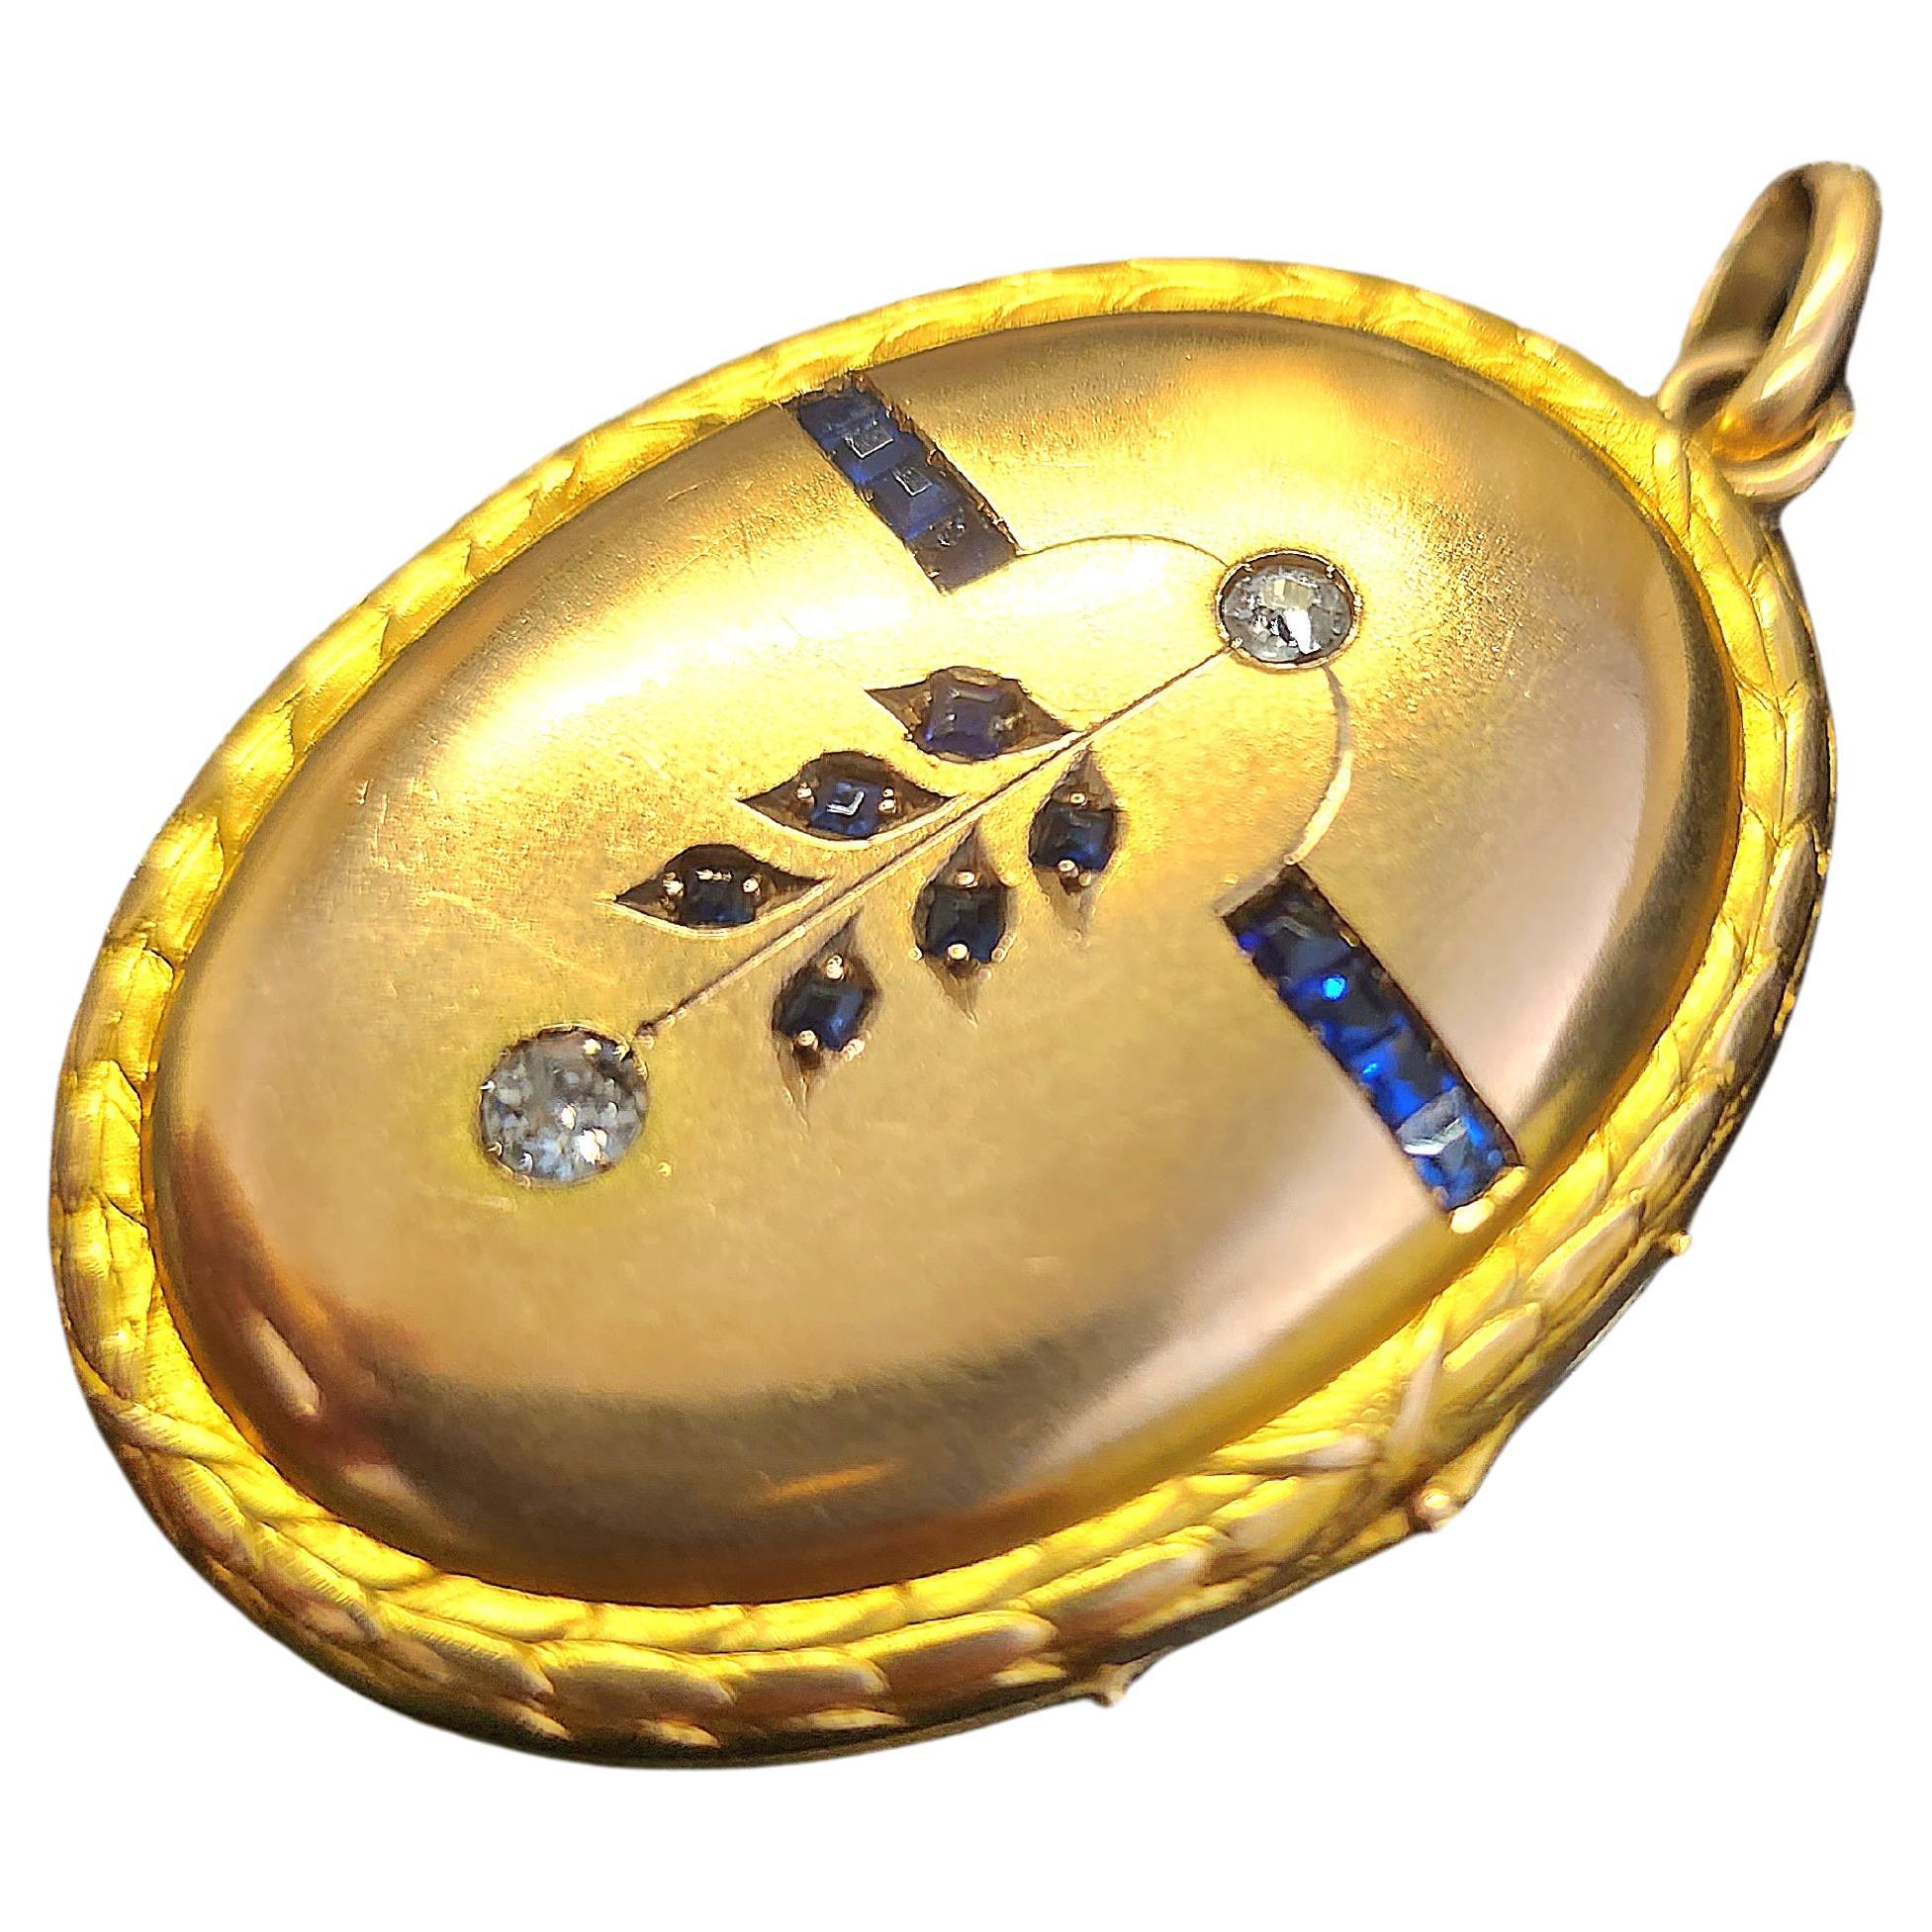 Antique locket 14k gold pendant in 2 tone color rose gold and yellow gold centered with 2 old mine cut diamonds decorted with natural baguet cut blue sapphires pendant lenght 5cm dates back to 1900/1910s during the imperial russian era hall marked